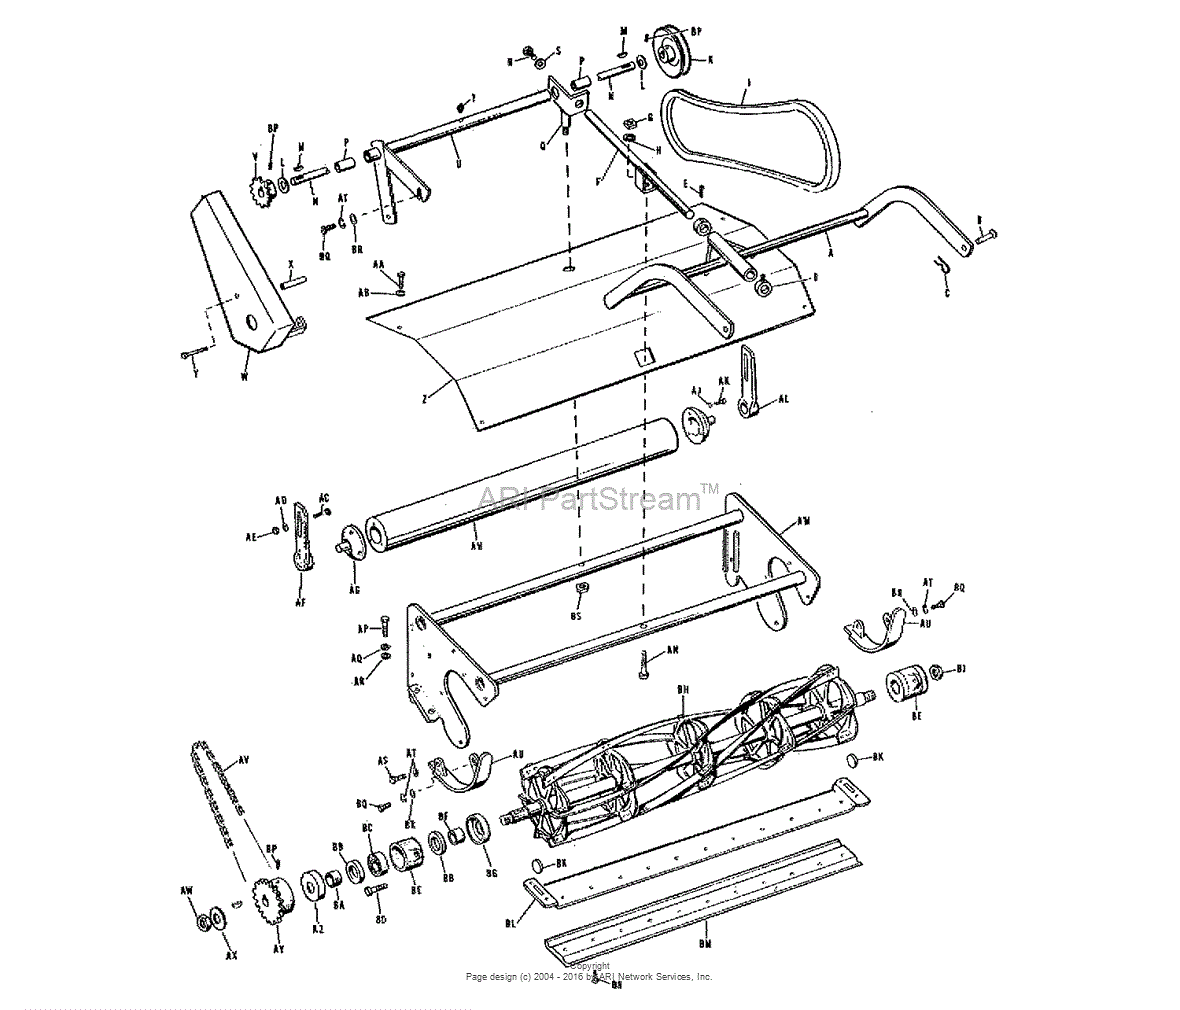 https://az417944.vo.msecnd.net/diagrams/manufacturer/simplicity/attachments-accessories/miscellaneous/990117-30-reel-mower/reel-mower-group-3584i01/diagram.gif